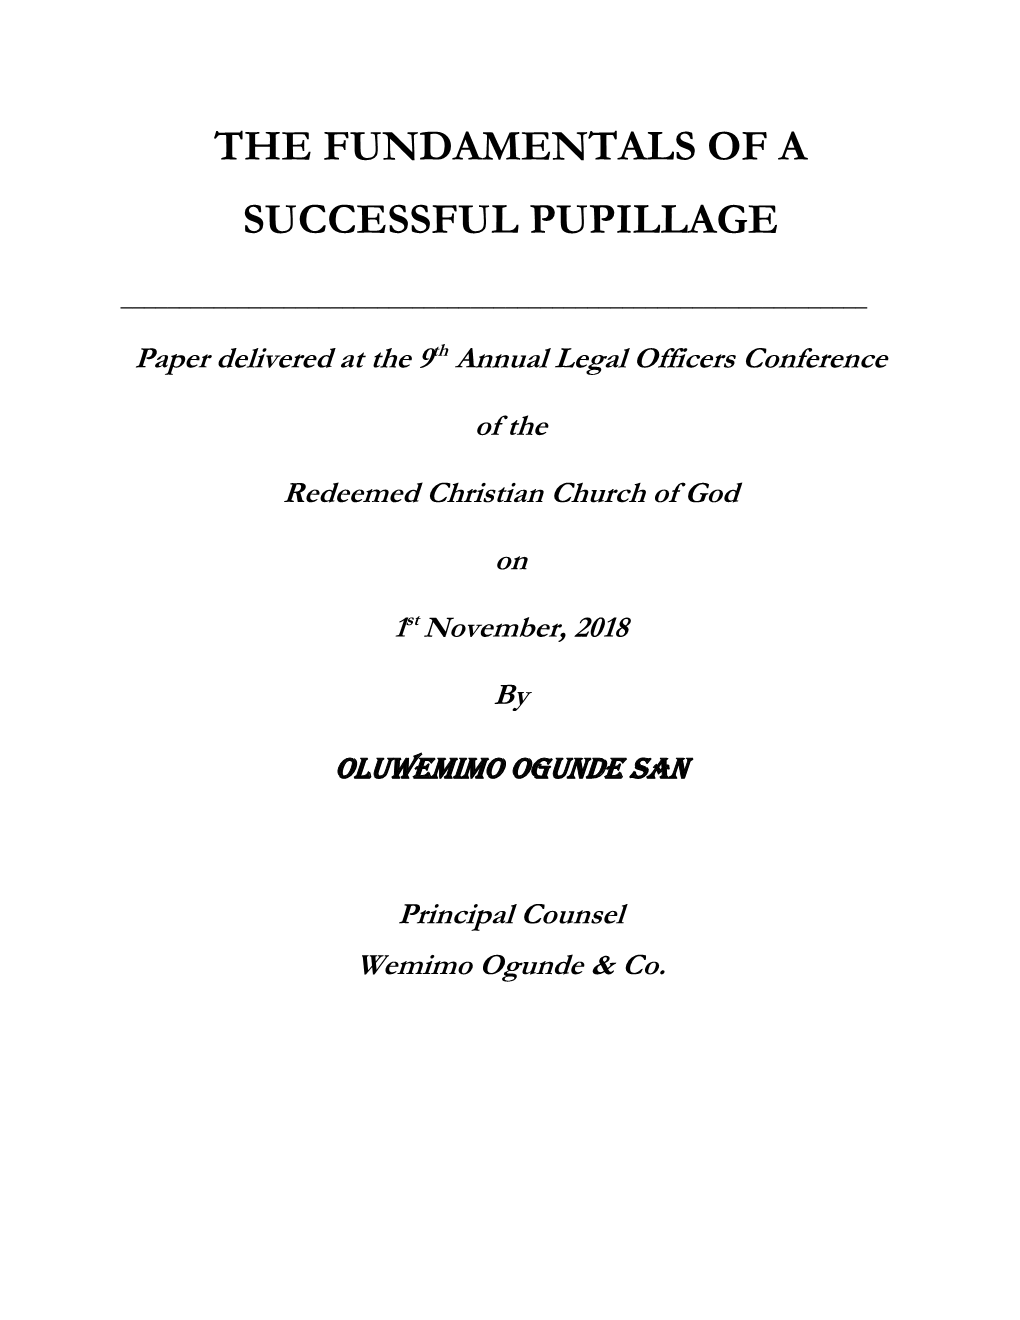 The Fundamentals of a Successful Pupillage